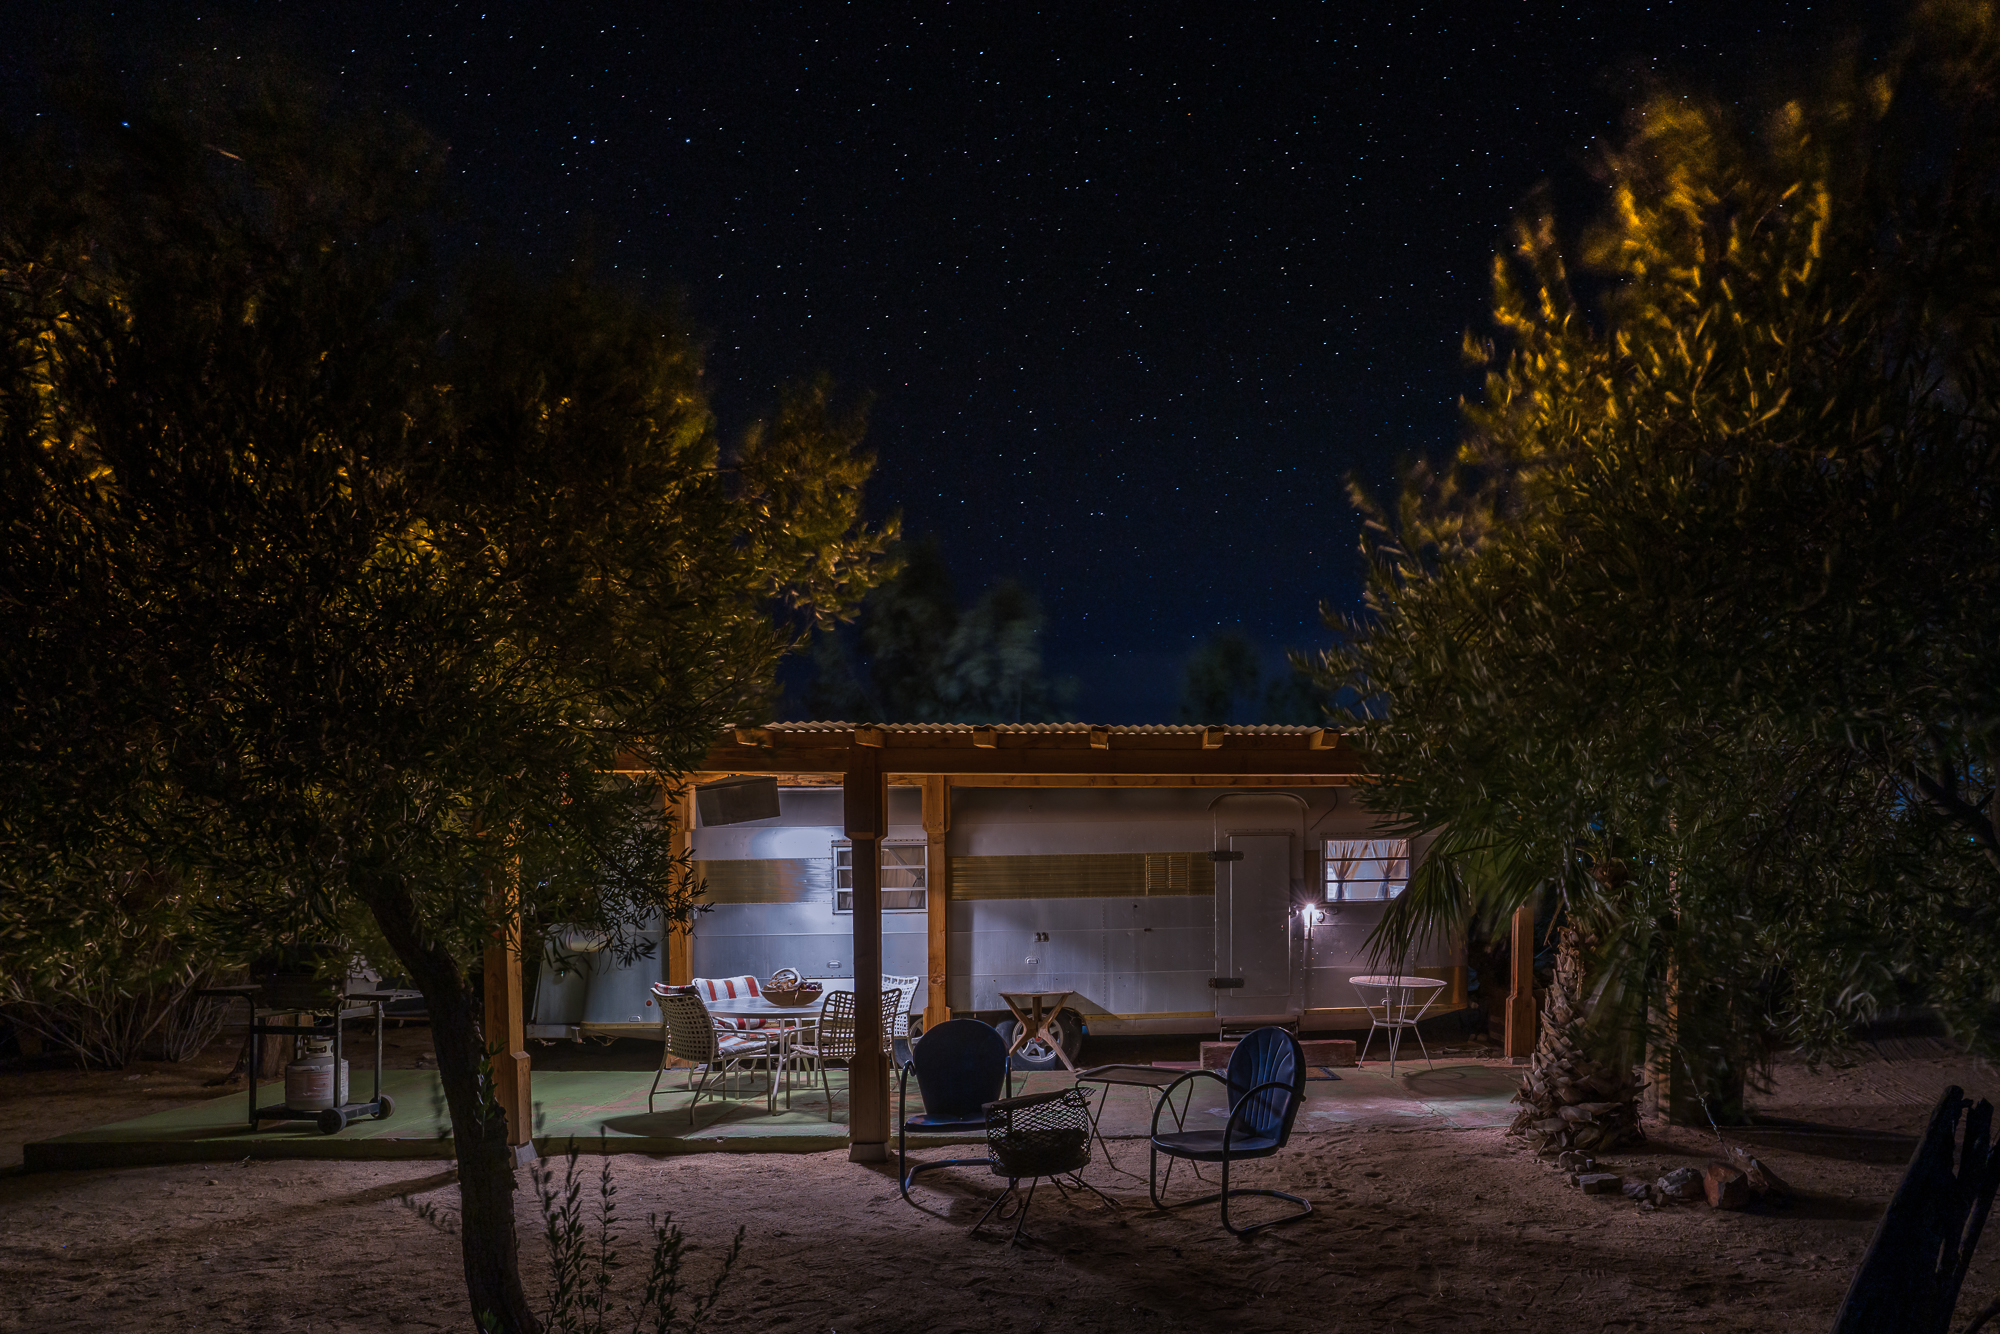 vintage silver streak trailer surrounded by olive trees and night with clear starry skies above